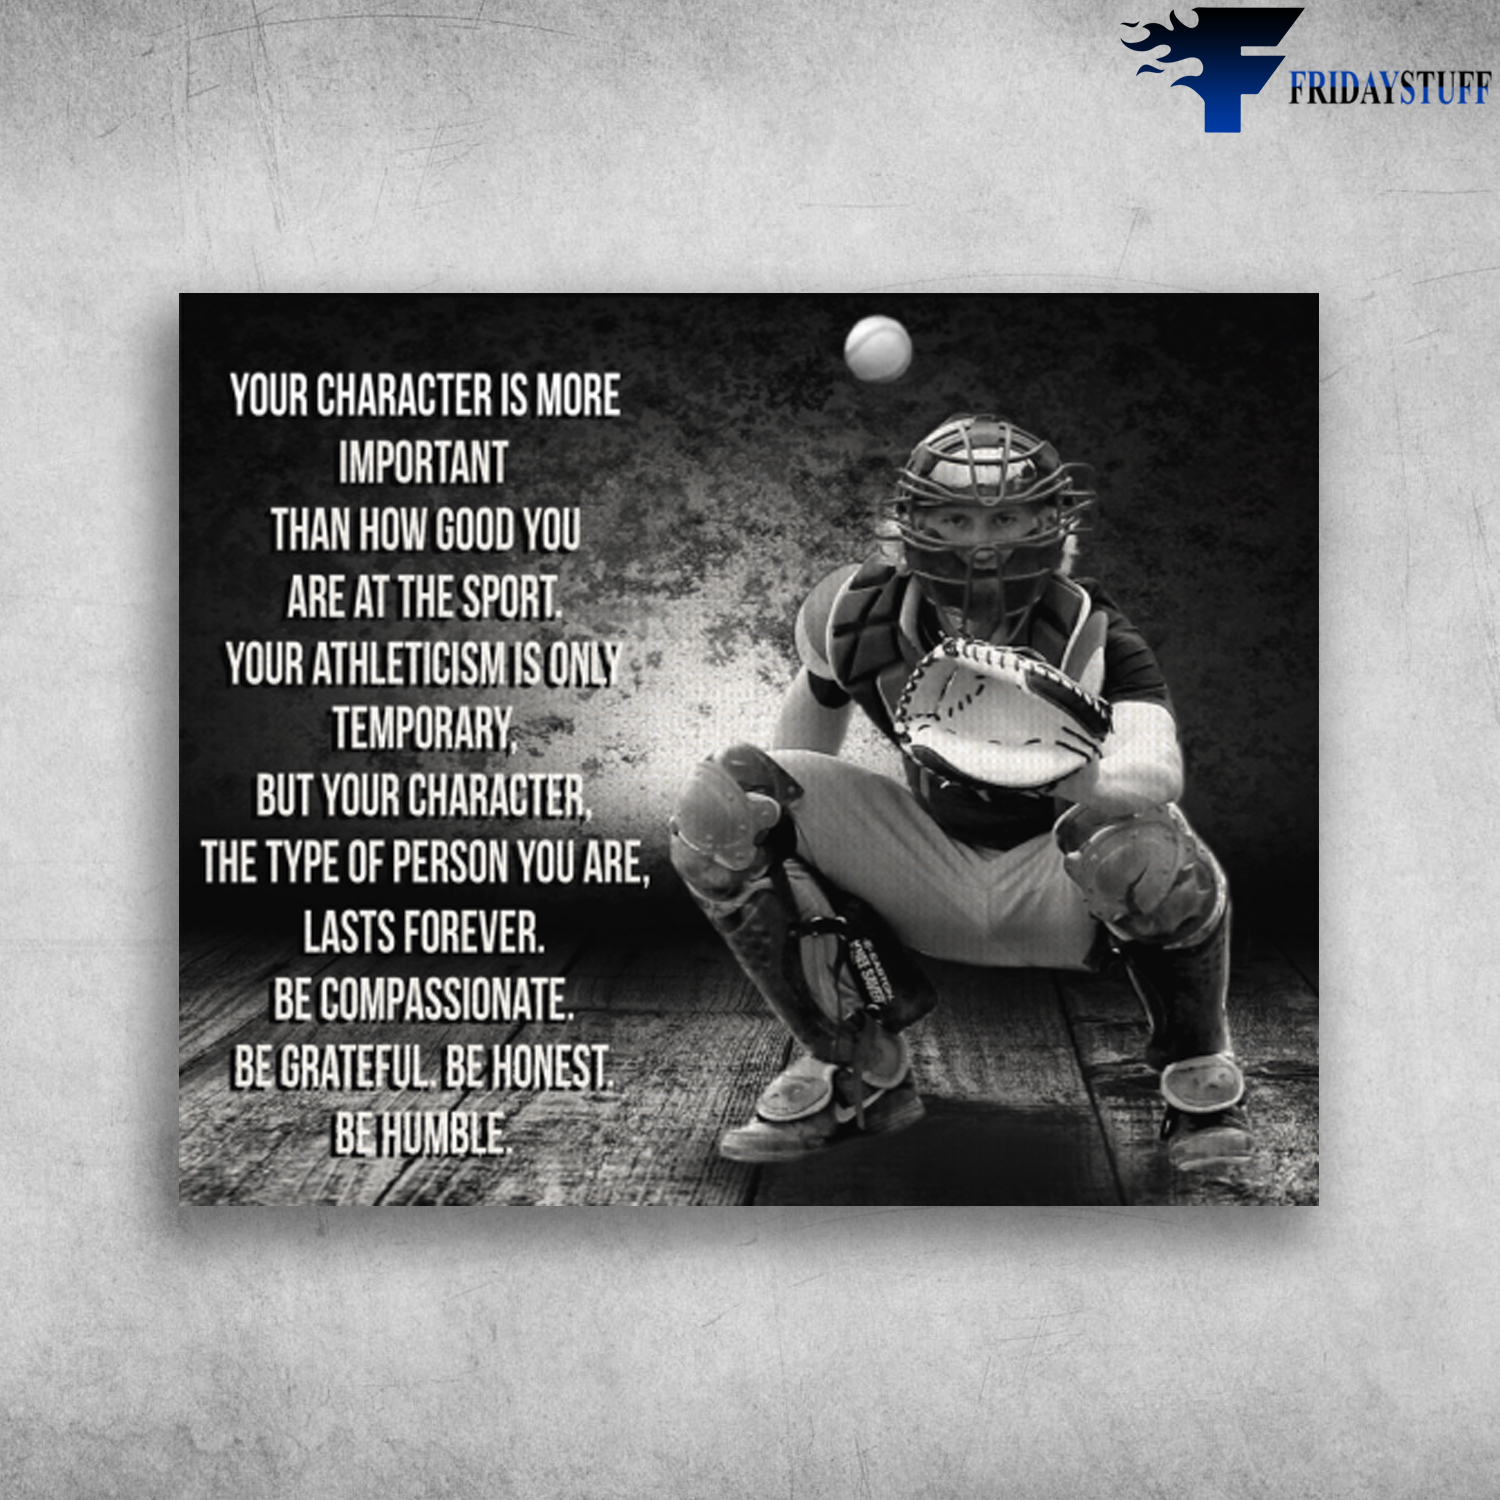 Baseball Player Your Character Is More Important Than How Good You Are